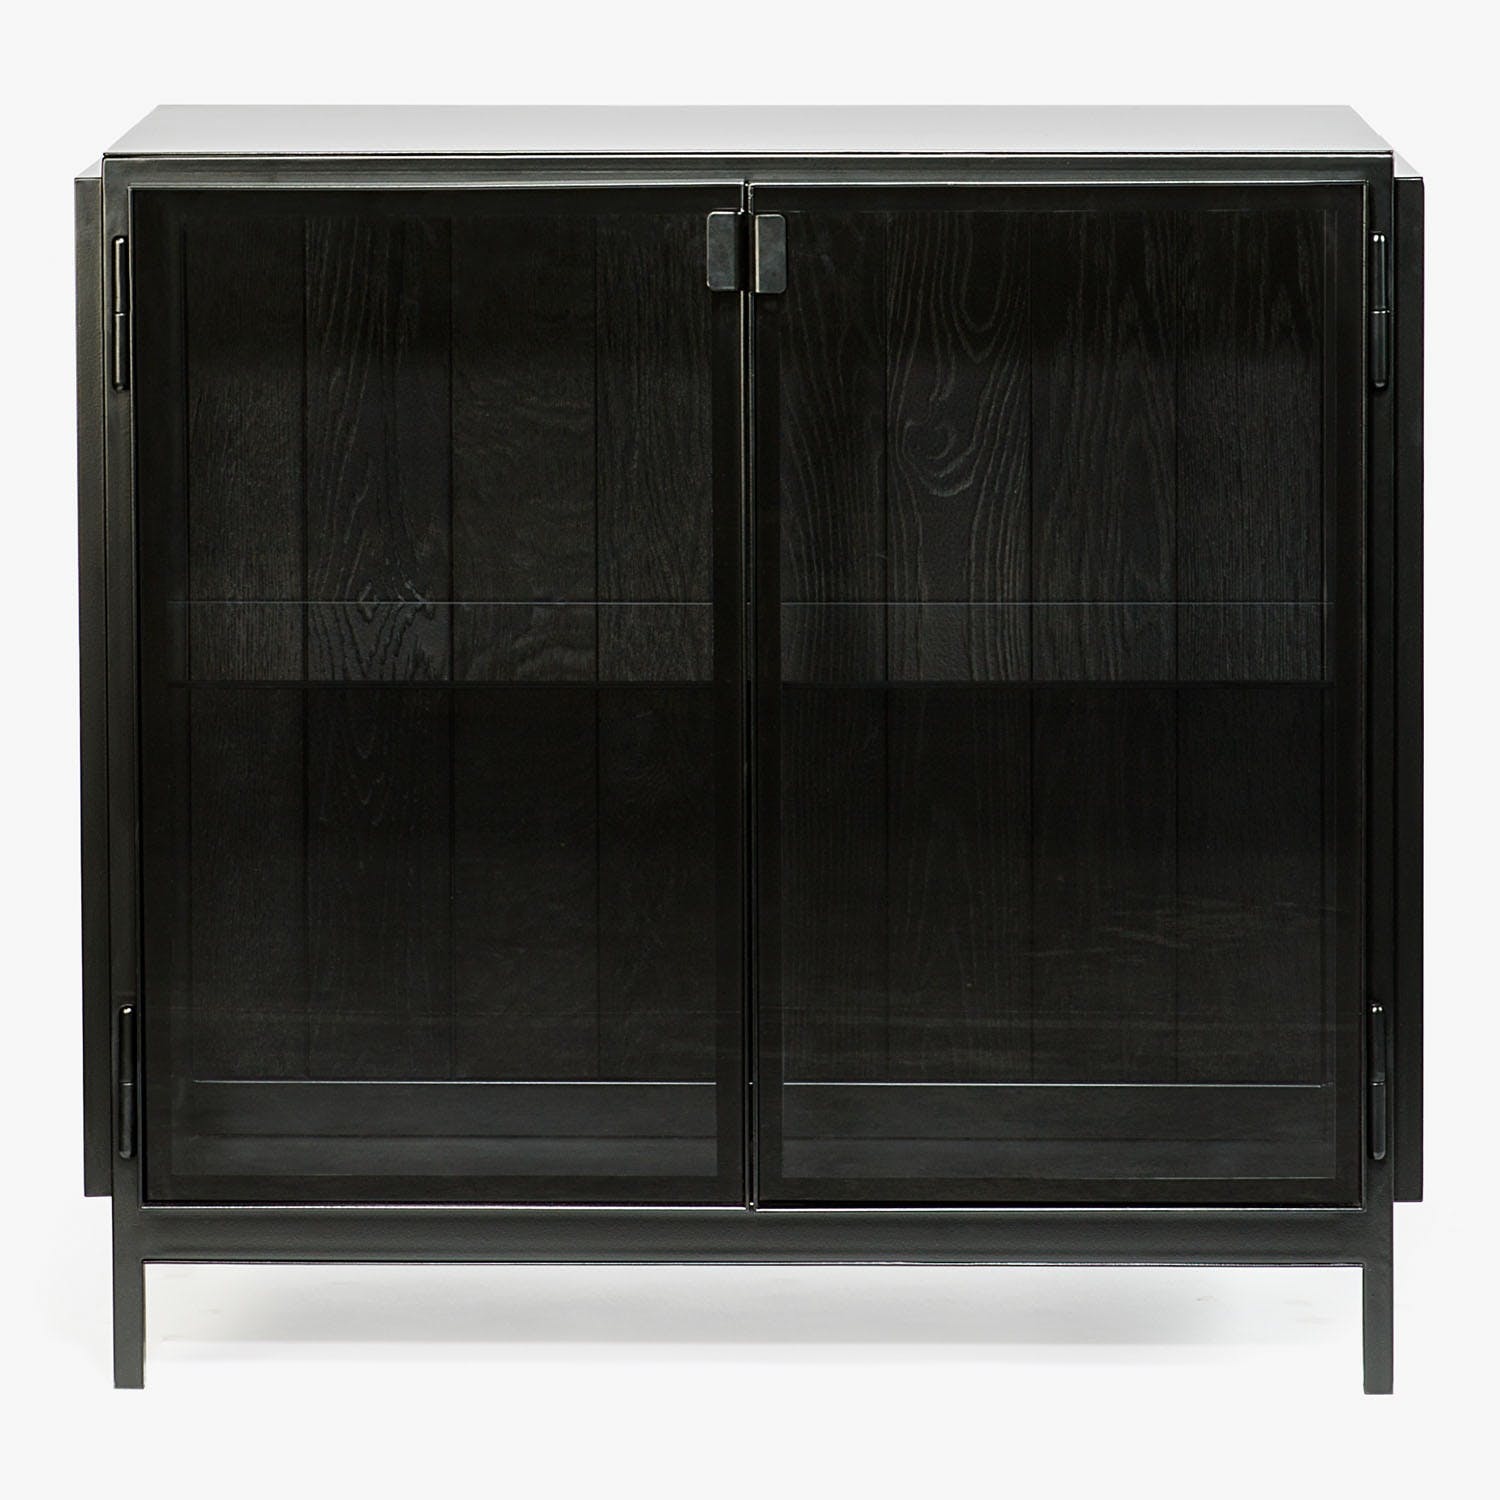 Modern wooden cabinet with glass doors and minimalist design.